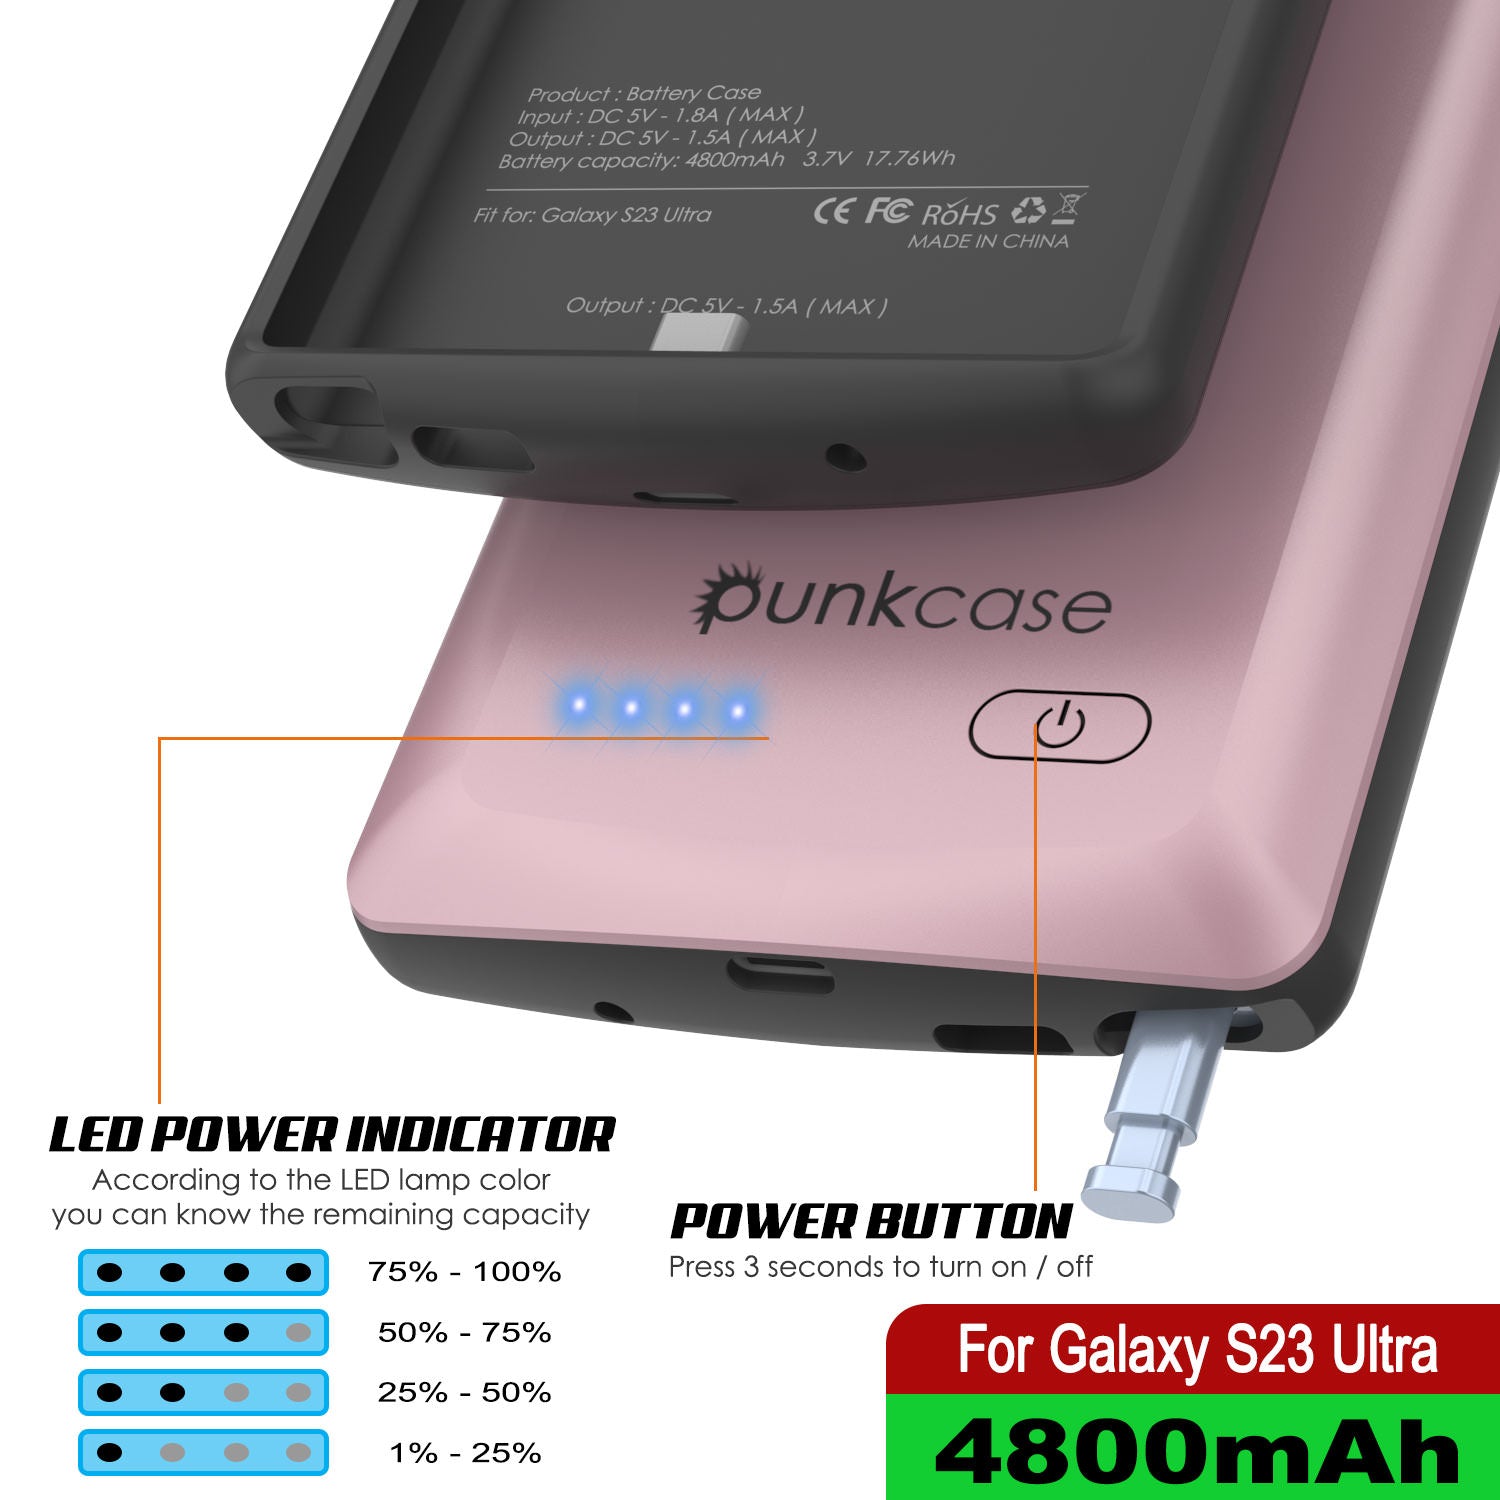 PunkJuice S23 Ultra Battery Case Rose-Gold - Portable Charging Power Juice Bank with 4800mAh